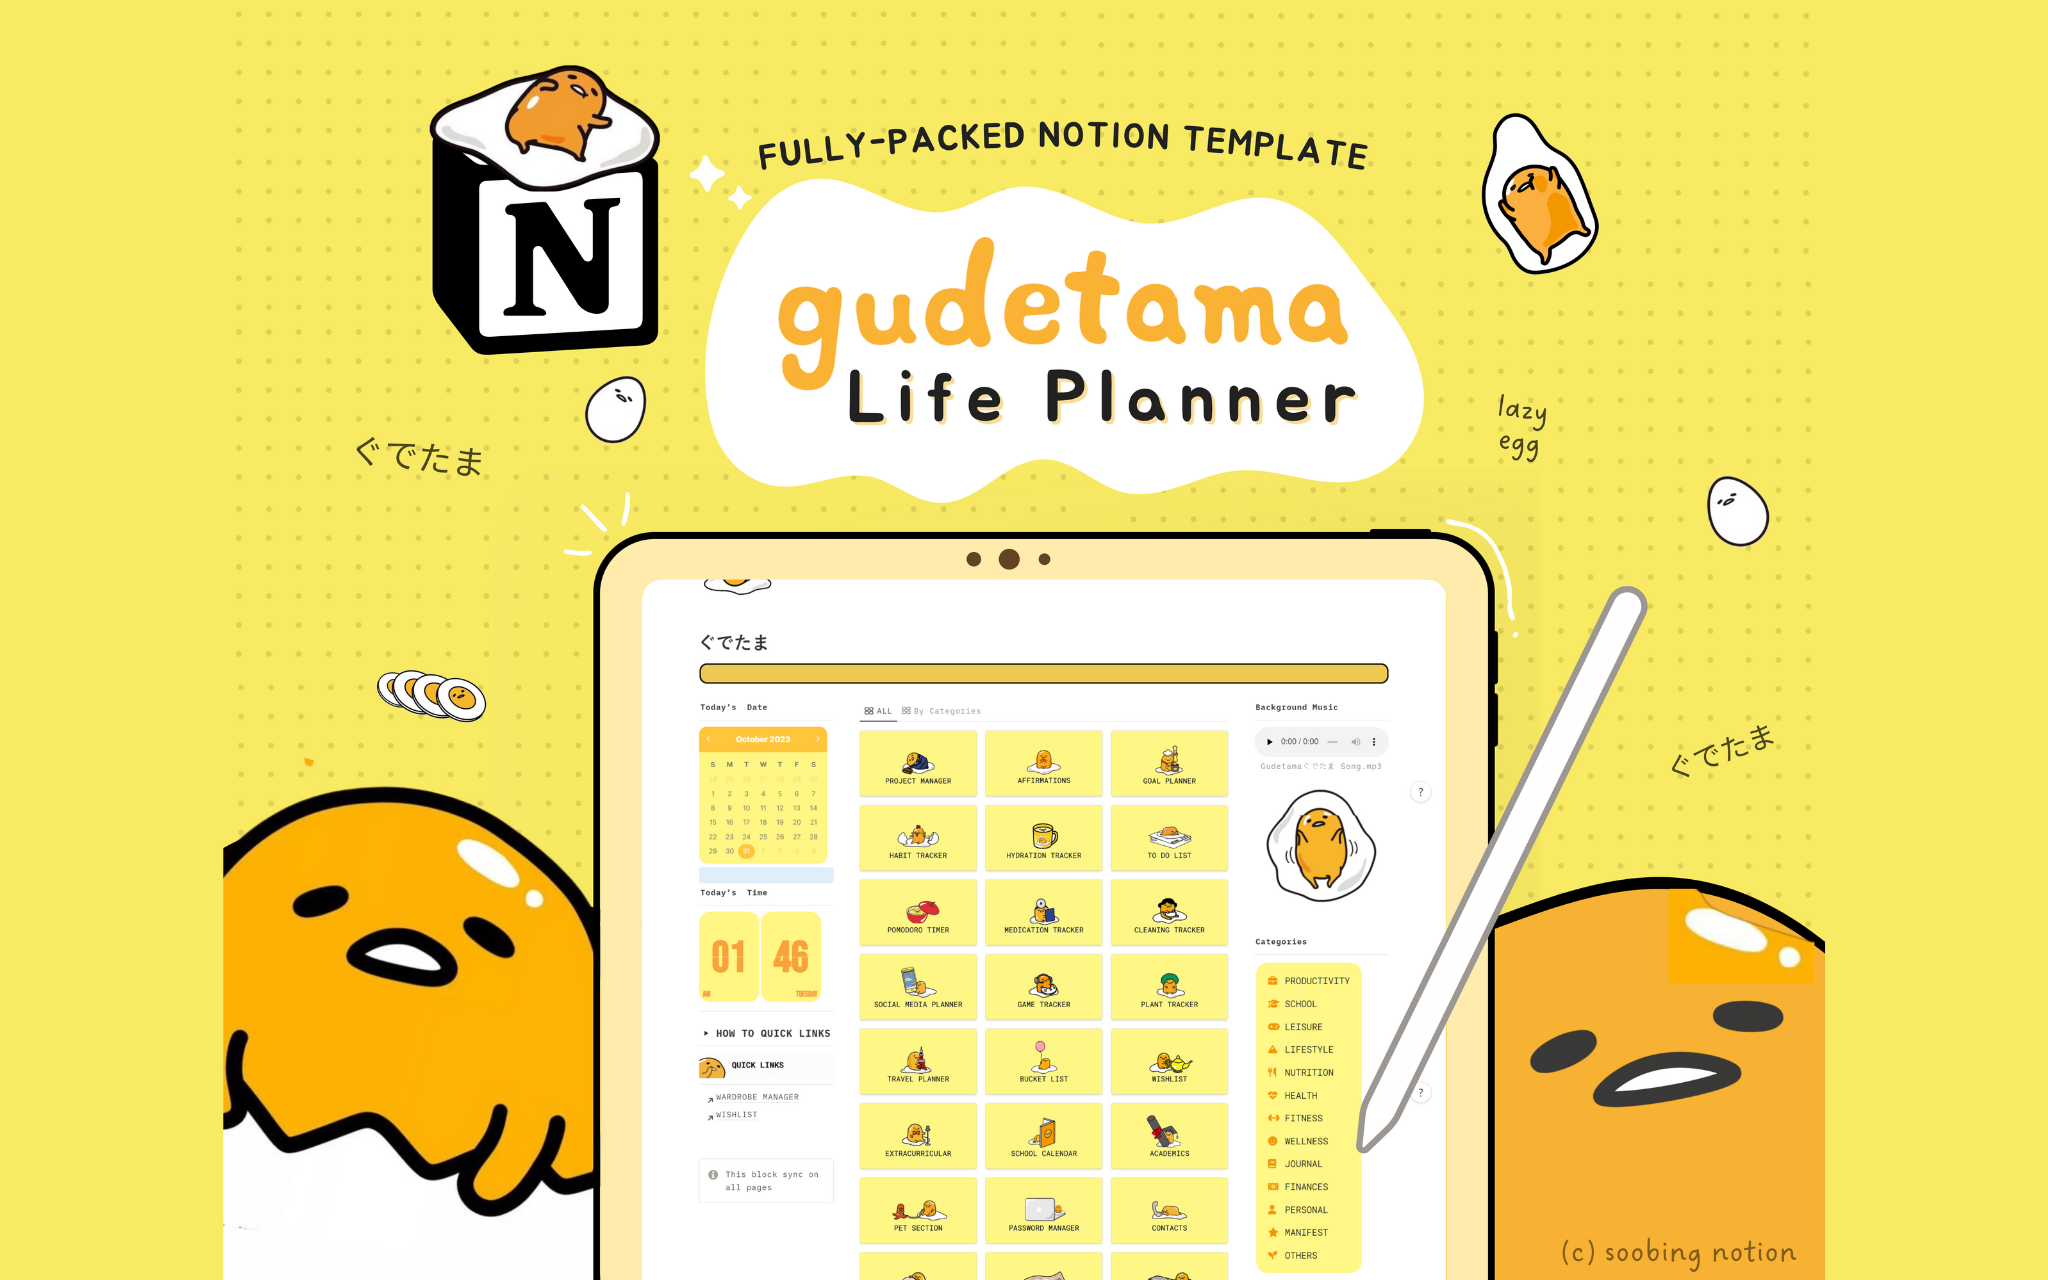 Introducing our G𝚞detama Character Notion Planner 🍳 – inspired by G𝚞detama, a popular Japanese character known for being a lazy egg. But don't worry, you won't be as lazy as G𝚞detama –this adorable character is just here to add its own unique flavor to your planning experienc